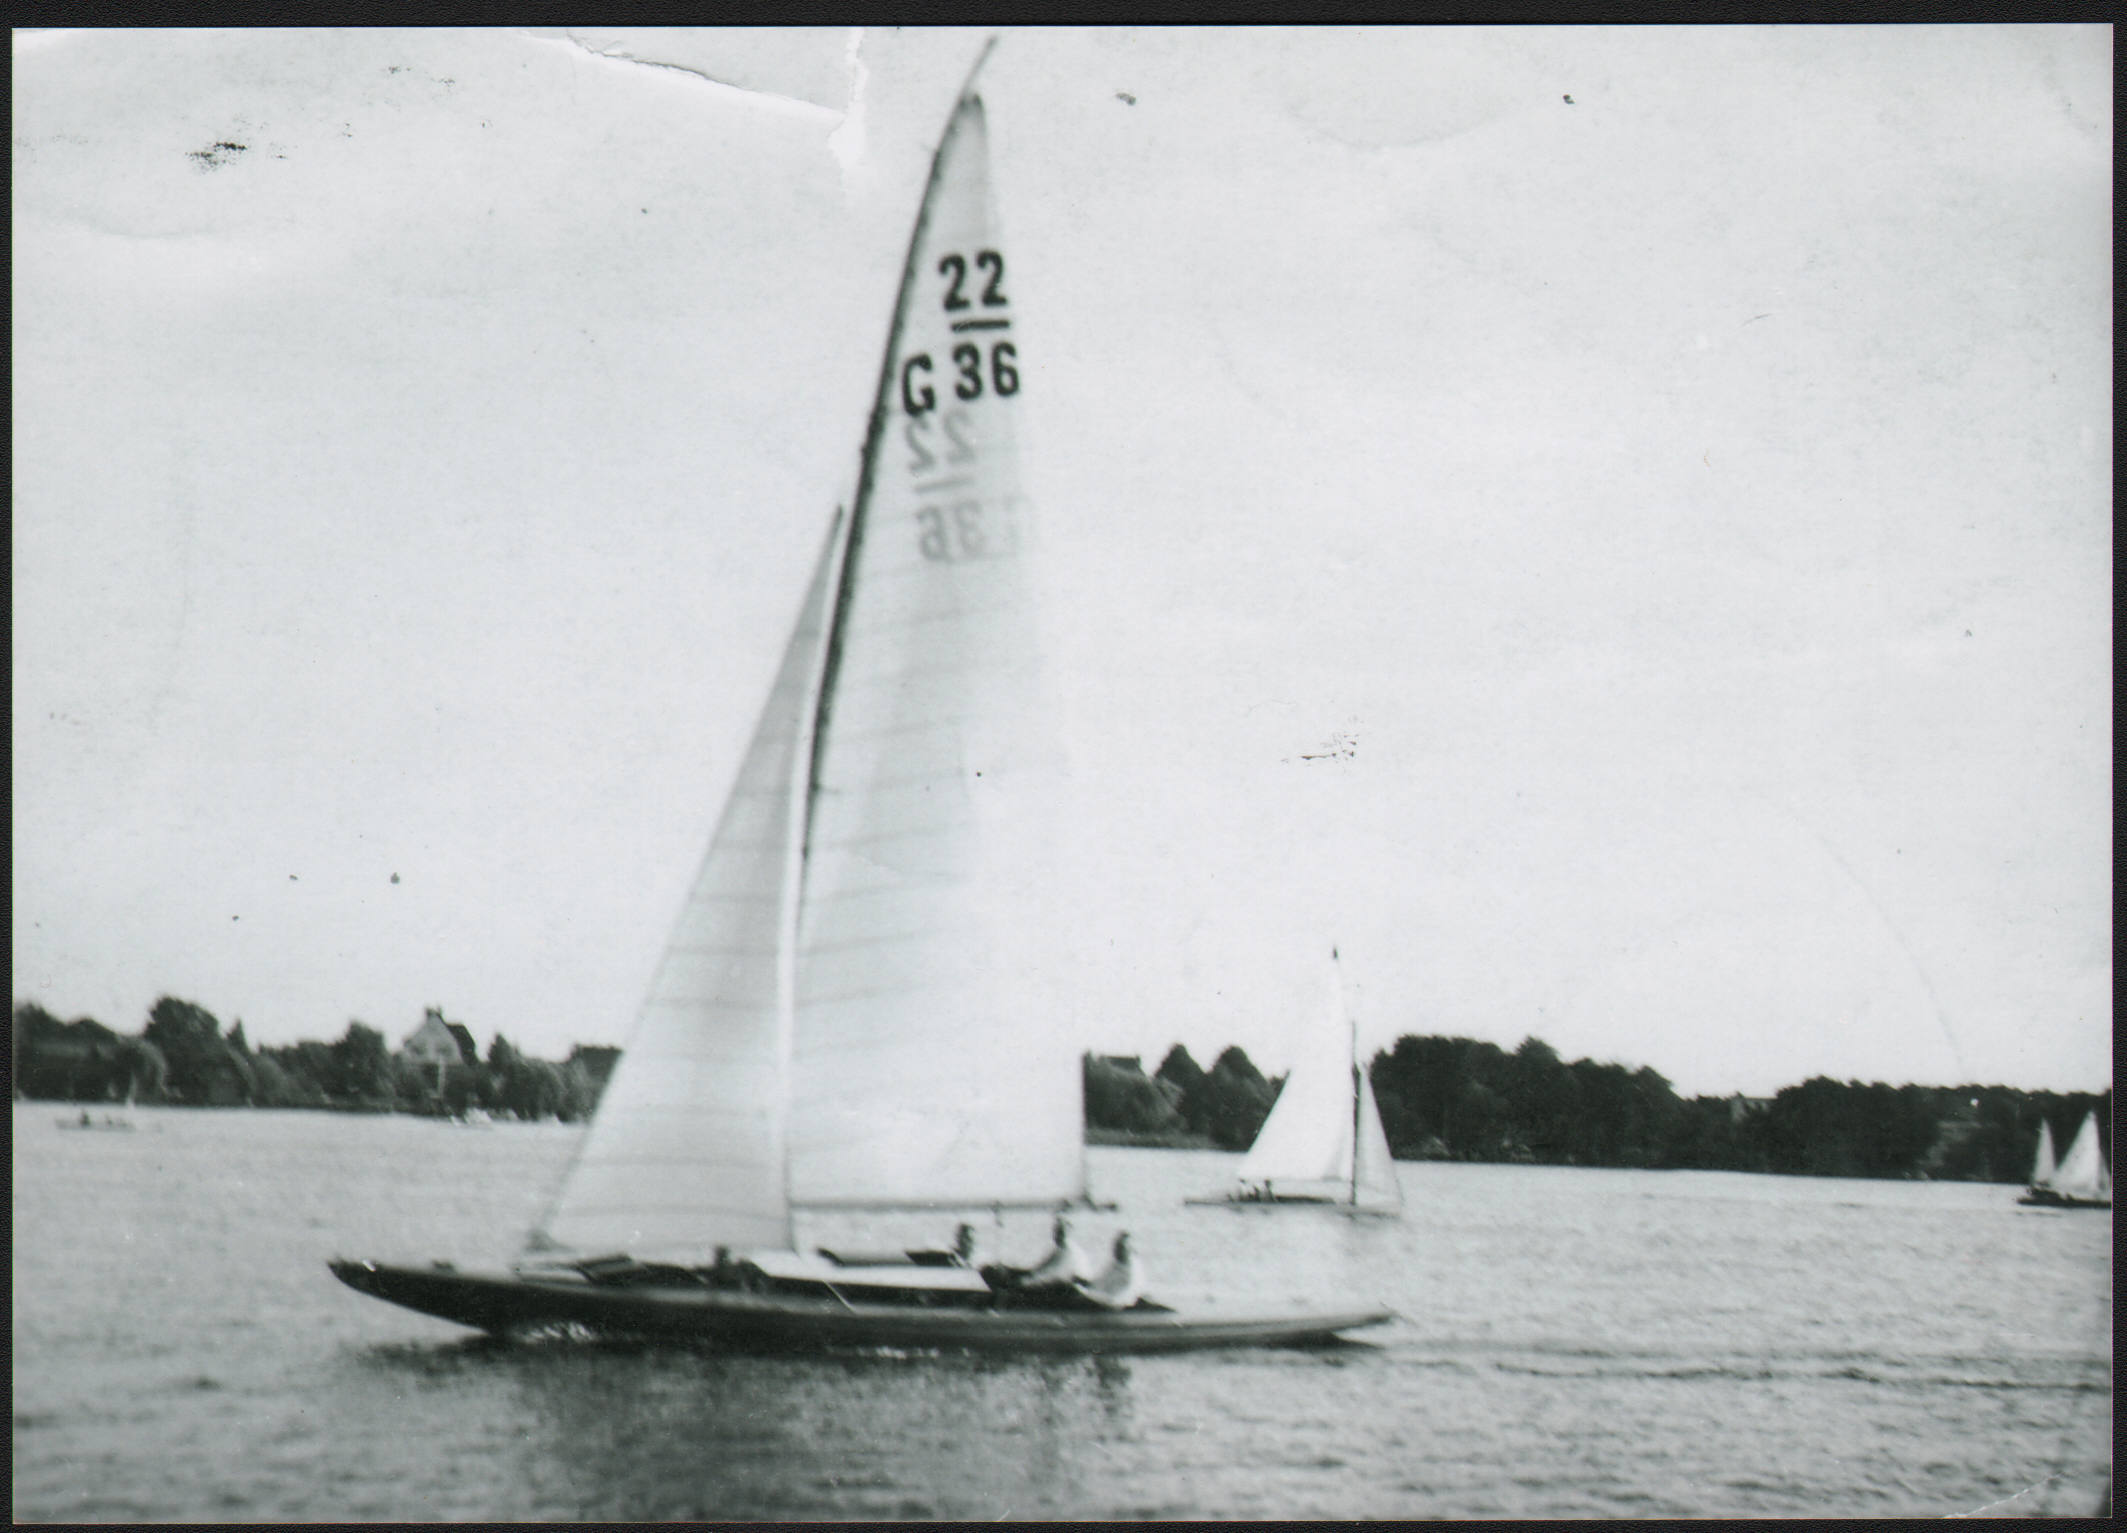 Ruth's father's racing yacht